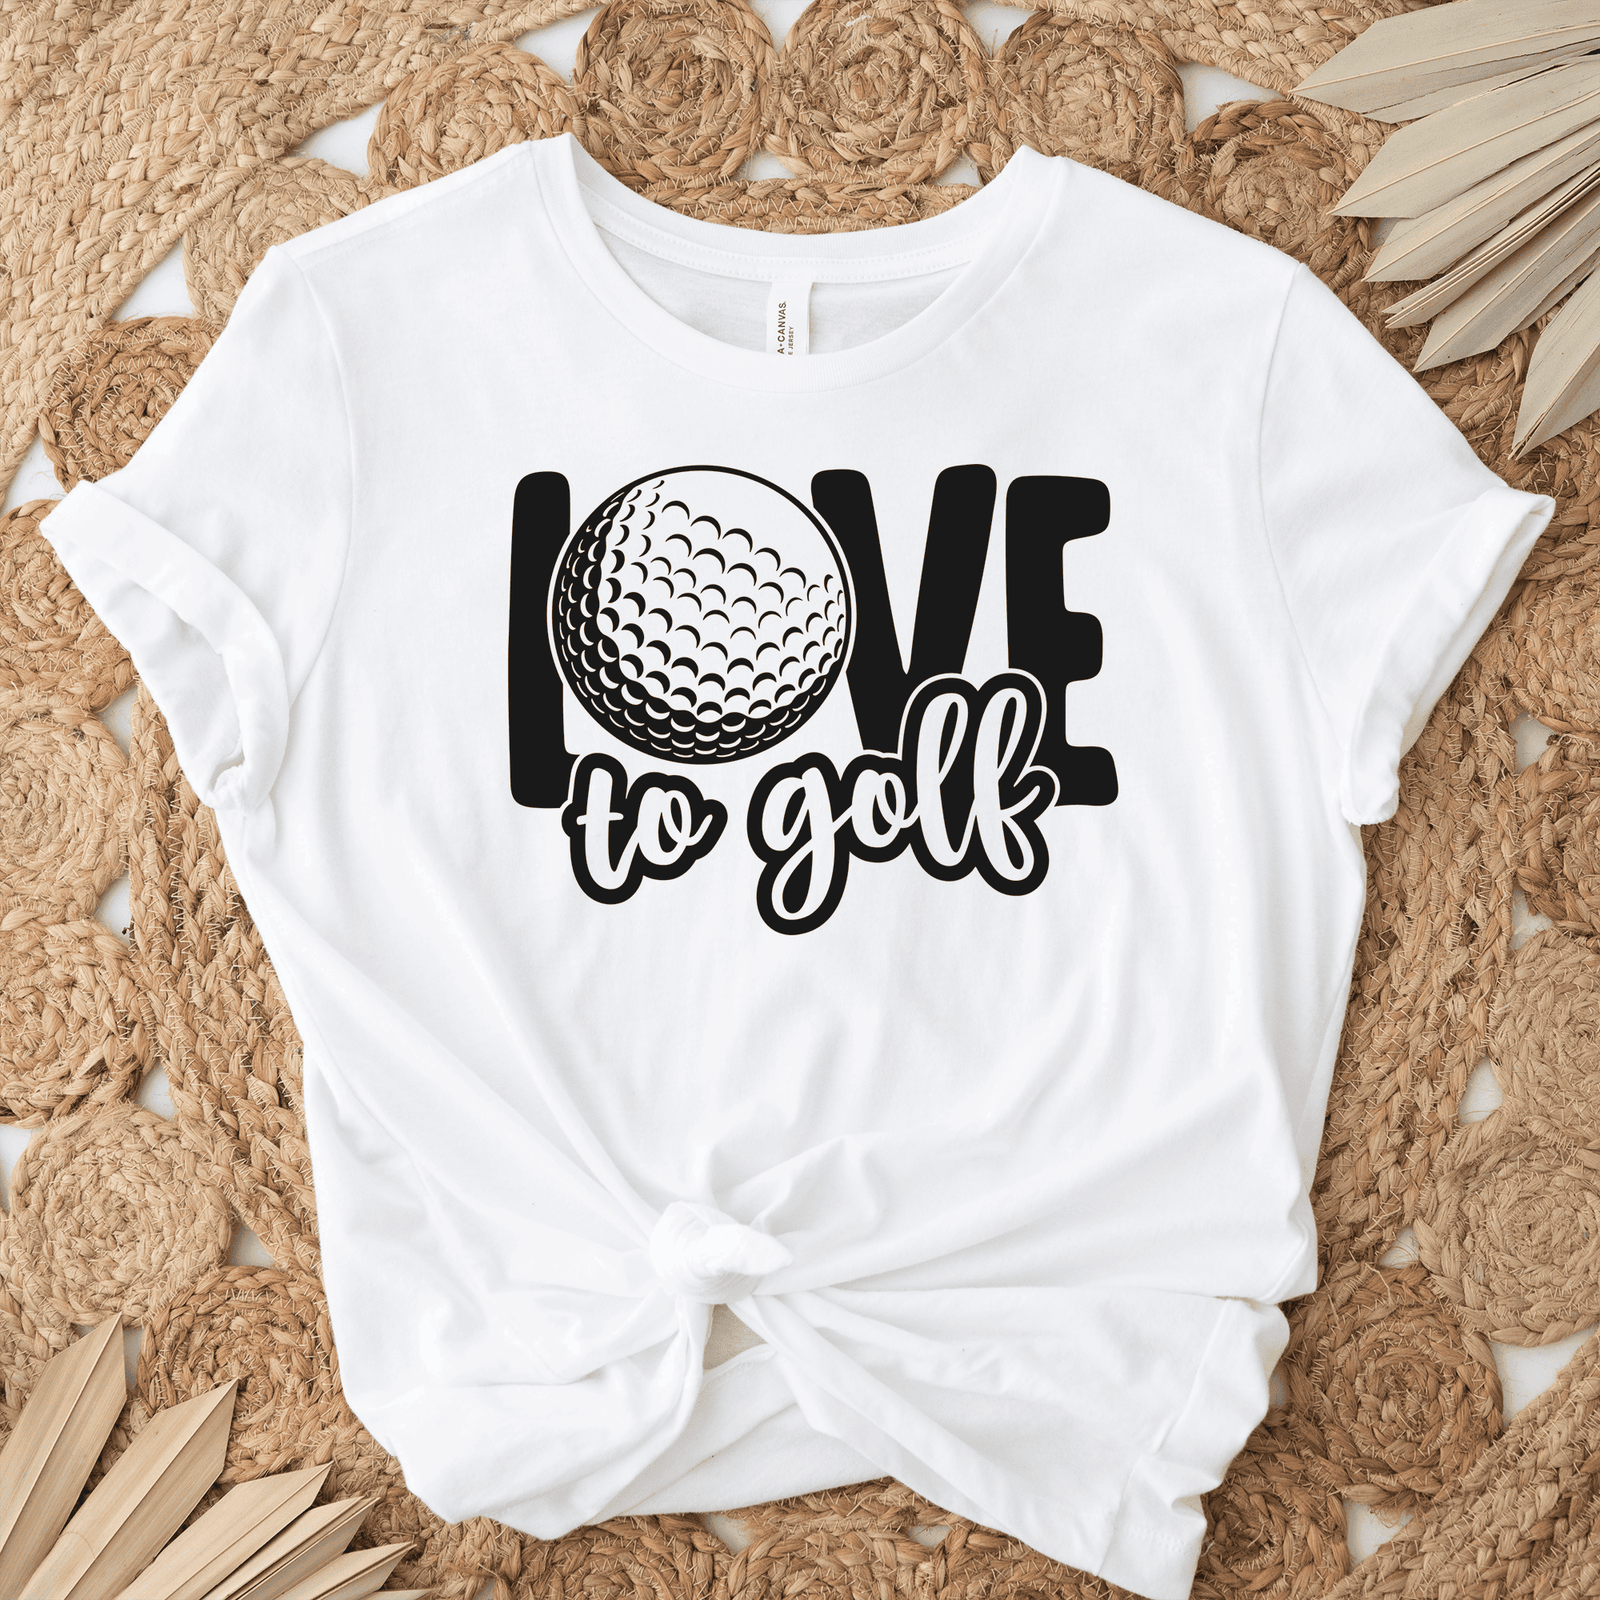 Womens White T Shirt with Golf-Is-Love design